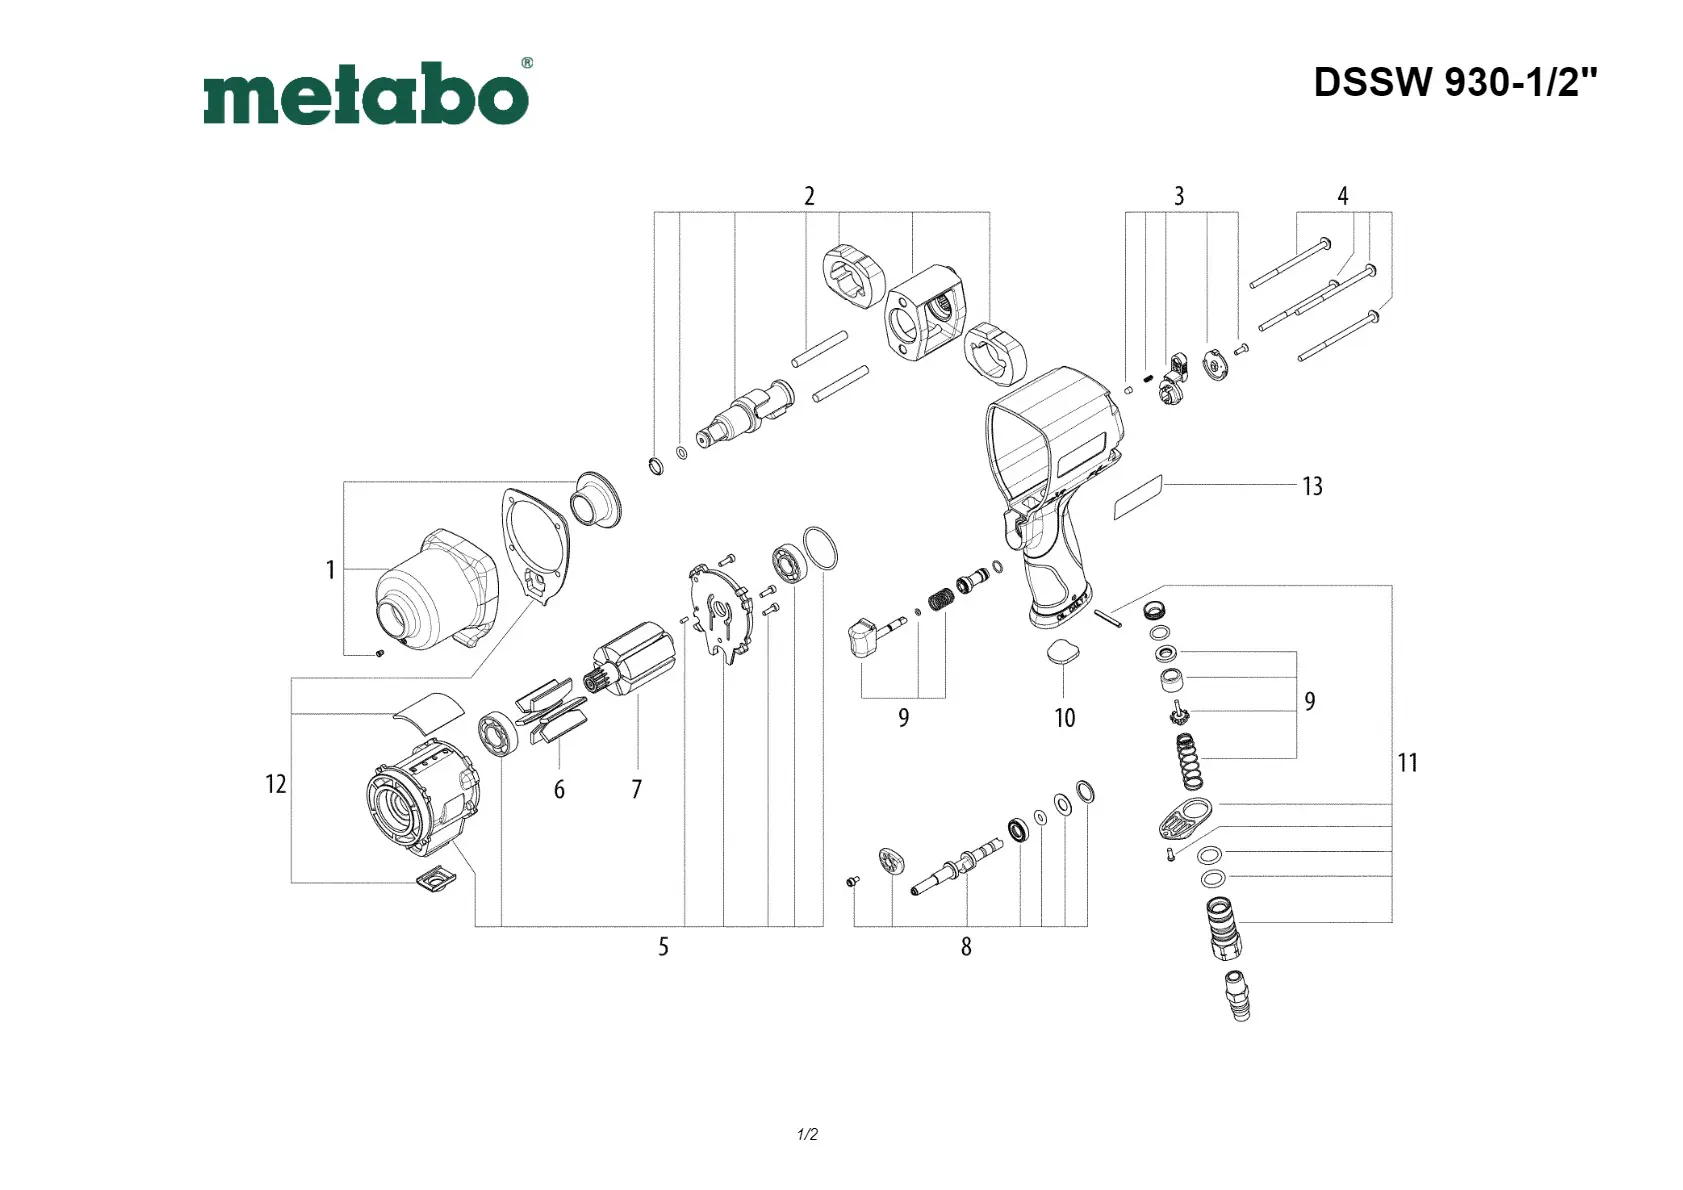 Metabo Change-over switch compl.